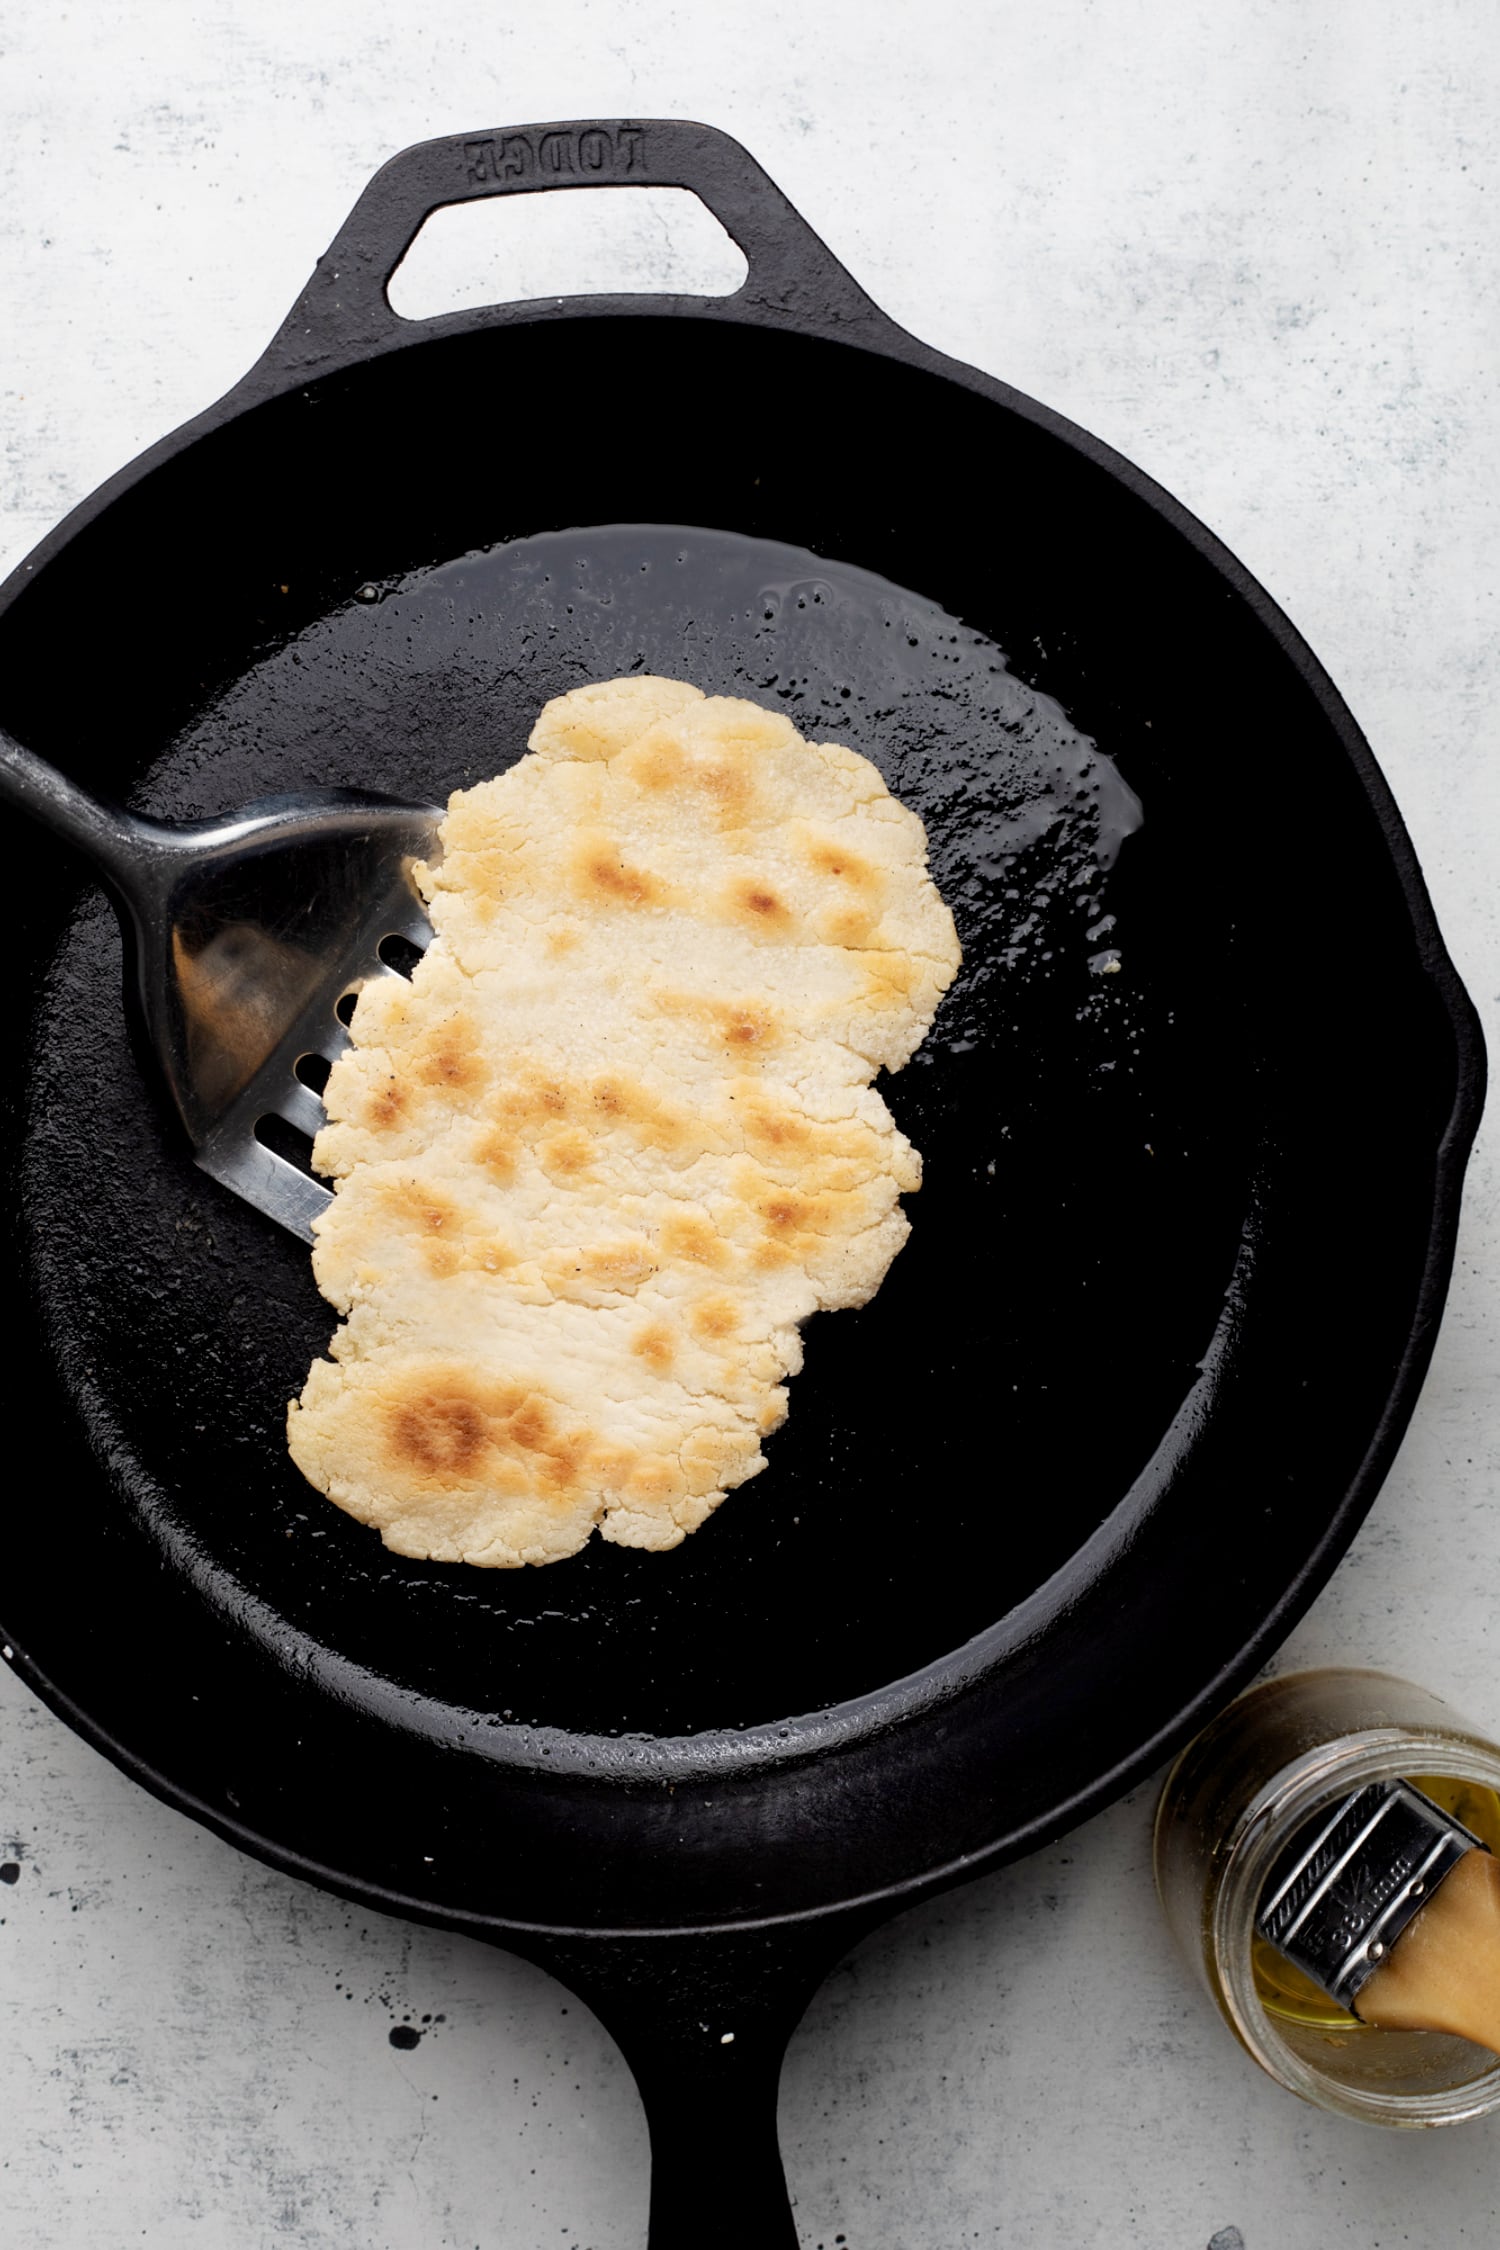 cooking gluten free naan bread in a cast iron pan